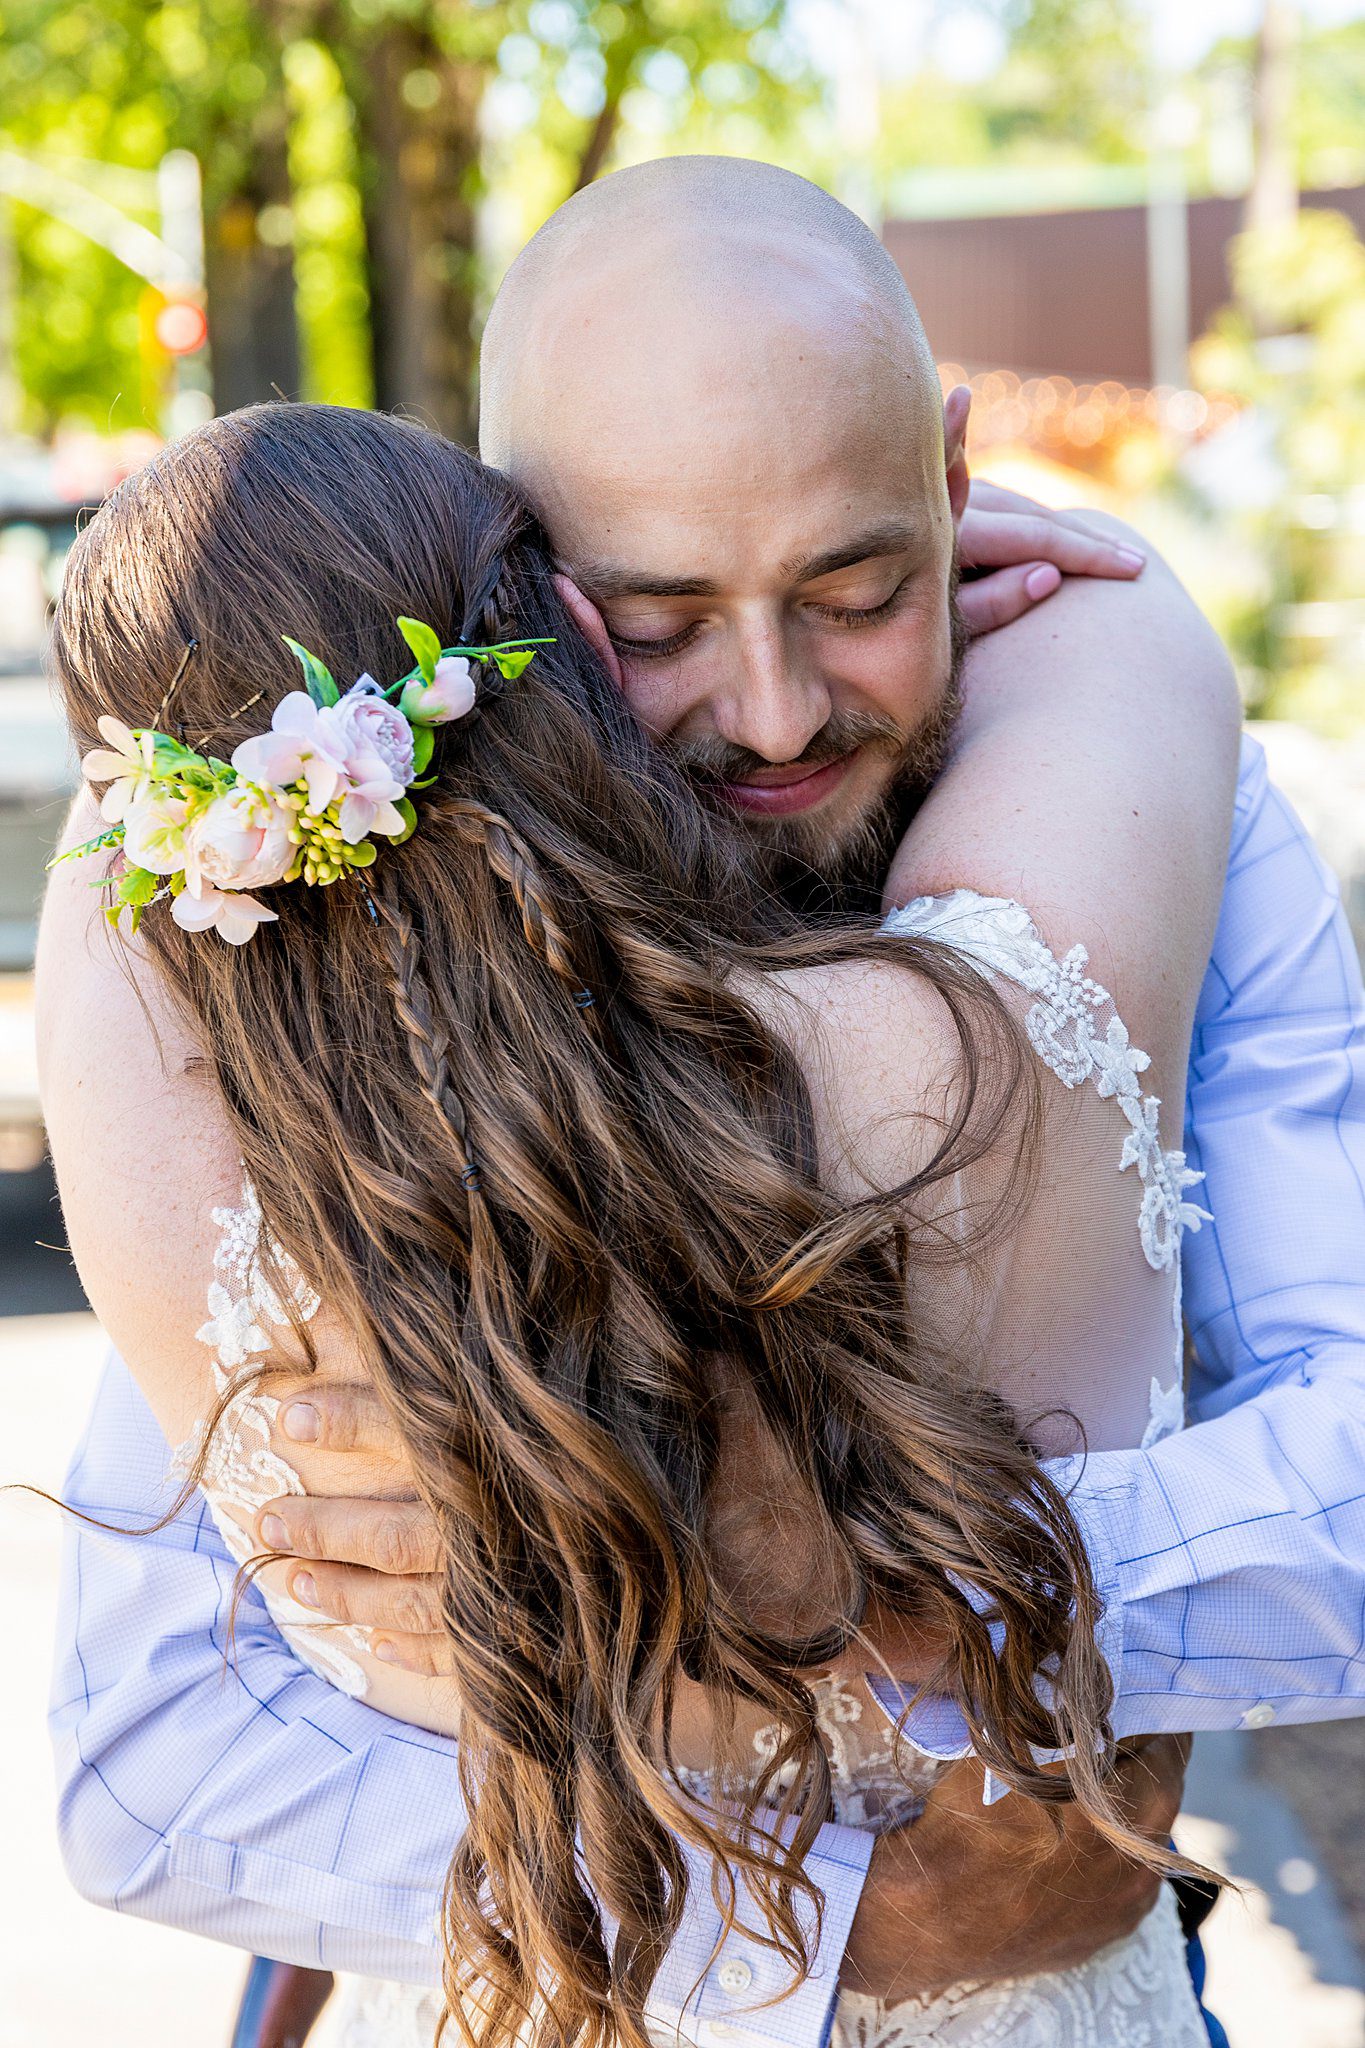 groom hugs his bride wearing a flower head piece and white lace dress at aspen grove wedding